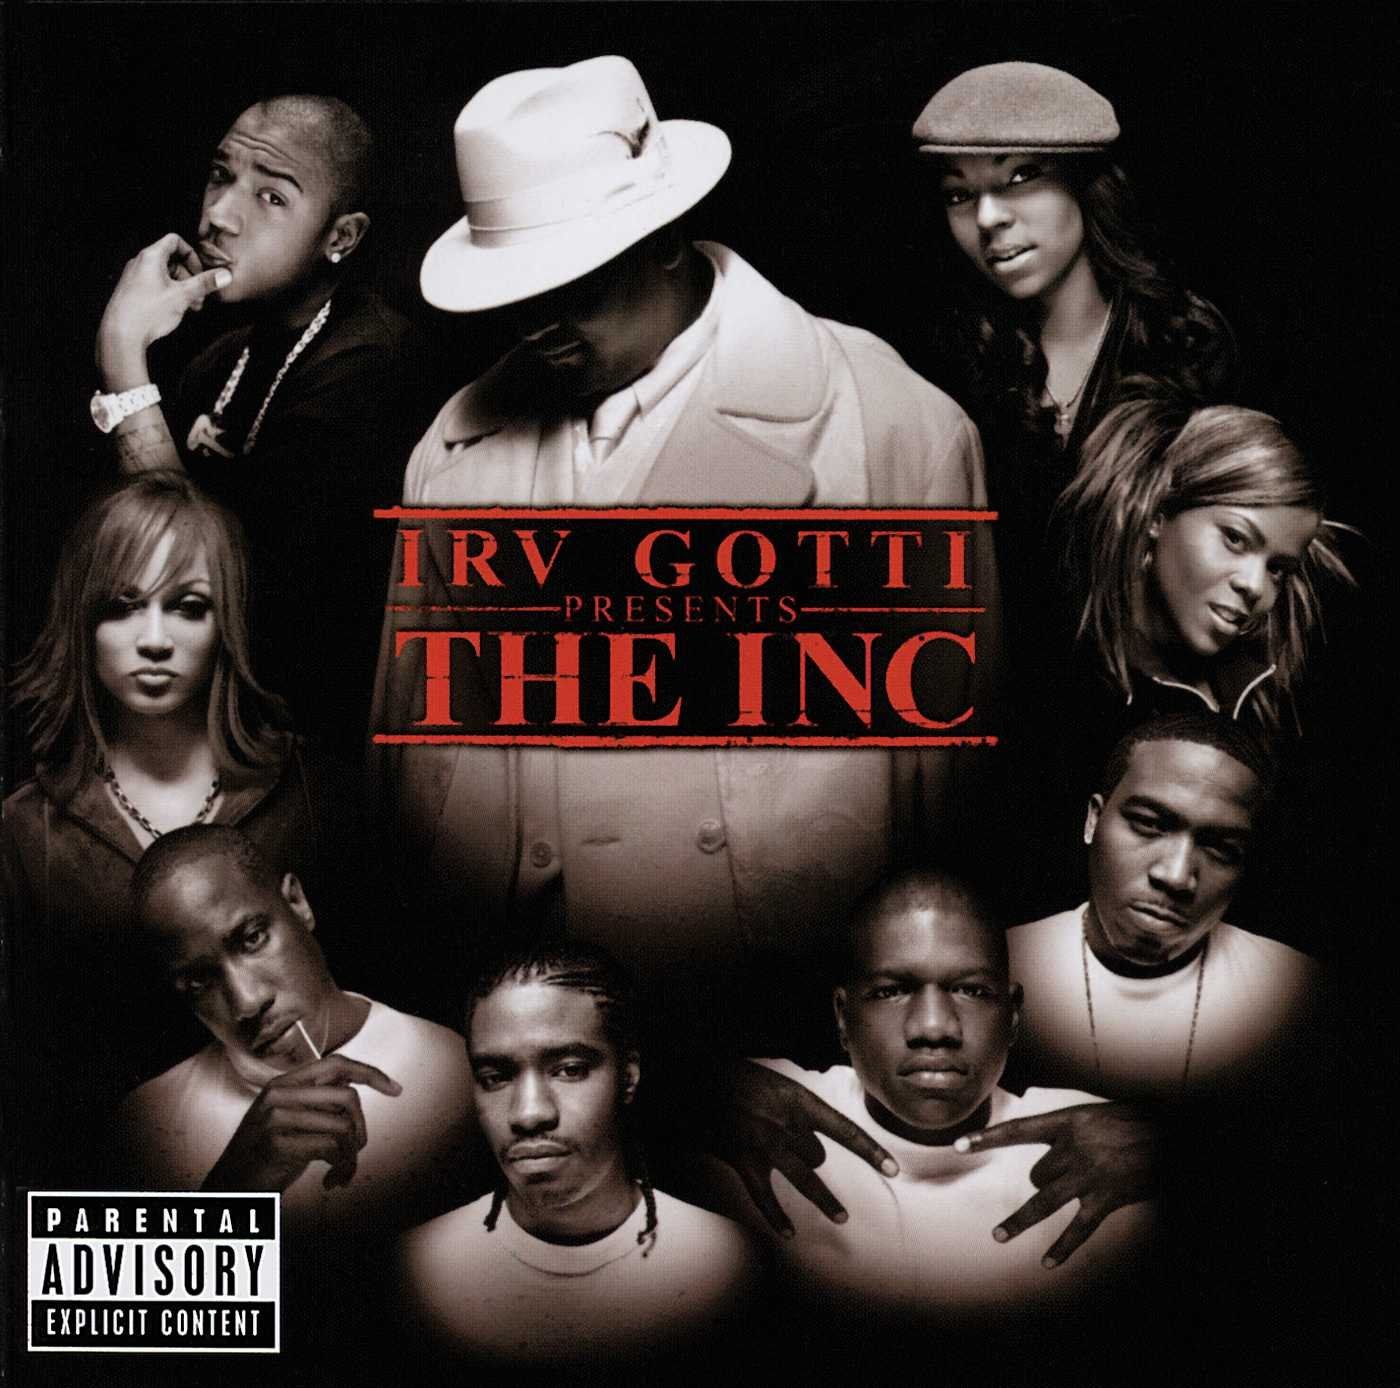 One Hearse, Two Suburbans: On “Irv Gotti Presents… The Inc”